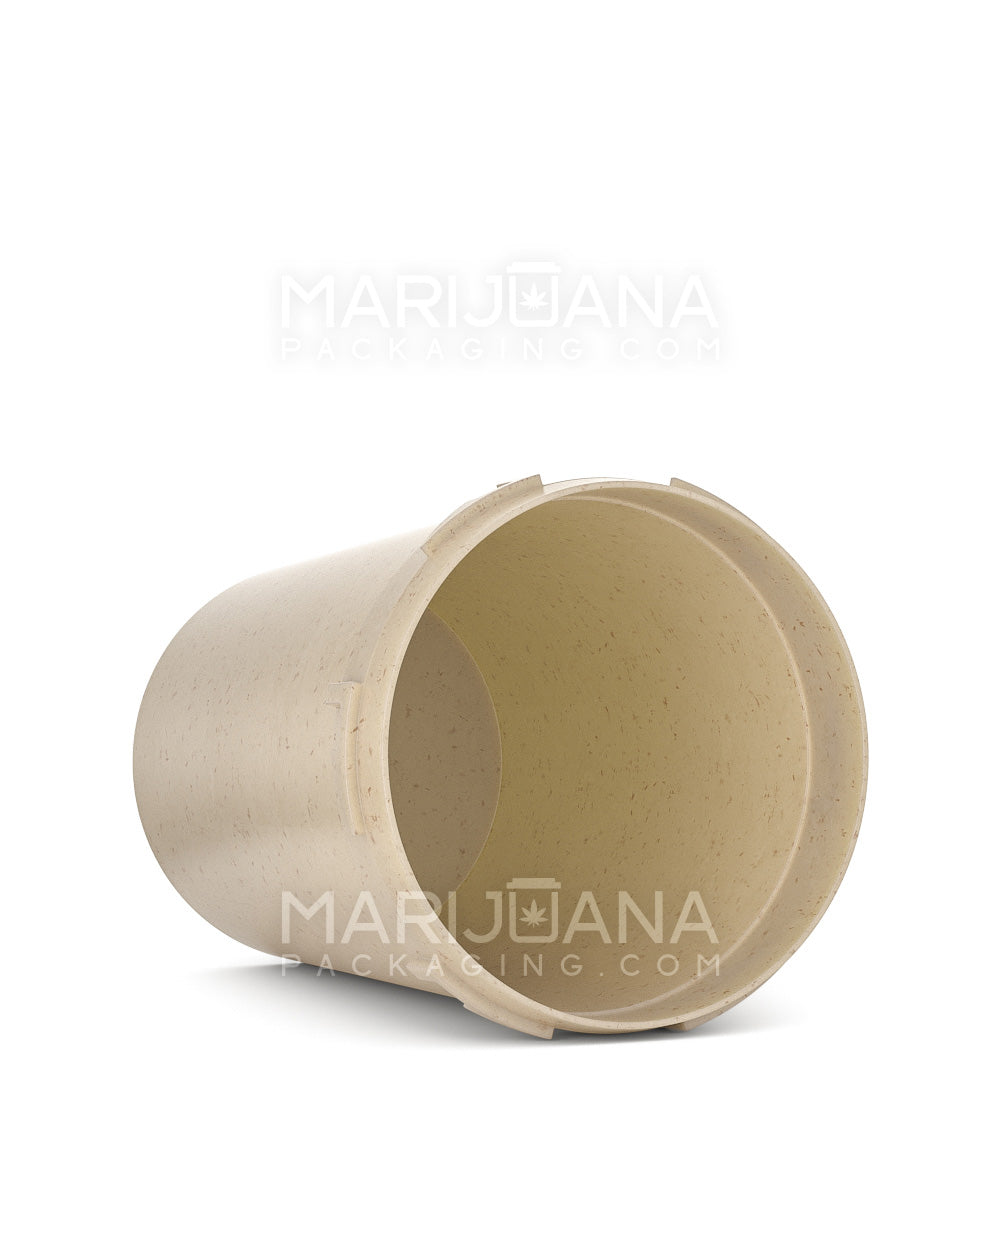 Child Resistant & Sustainable | 100% Biodegradable Hemp Push & Turn Vial | 34dr - 7g - 250 Count - 5